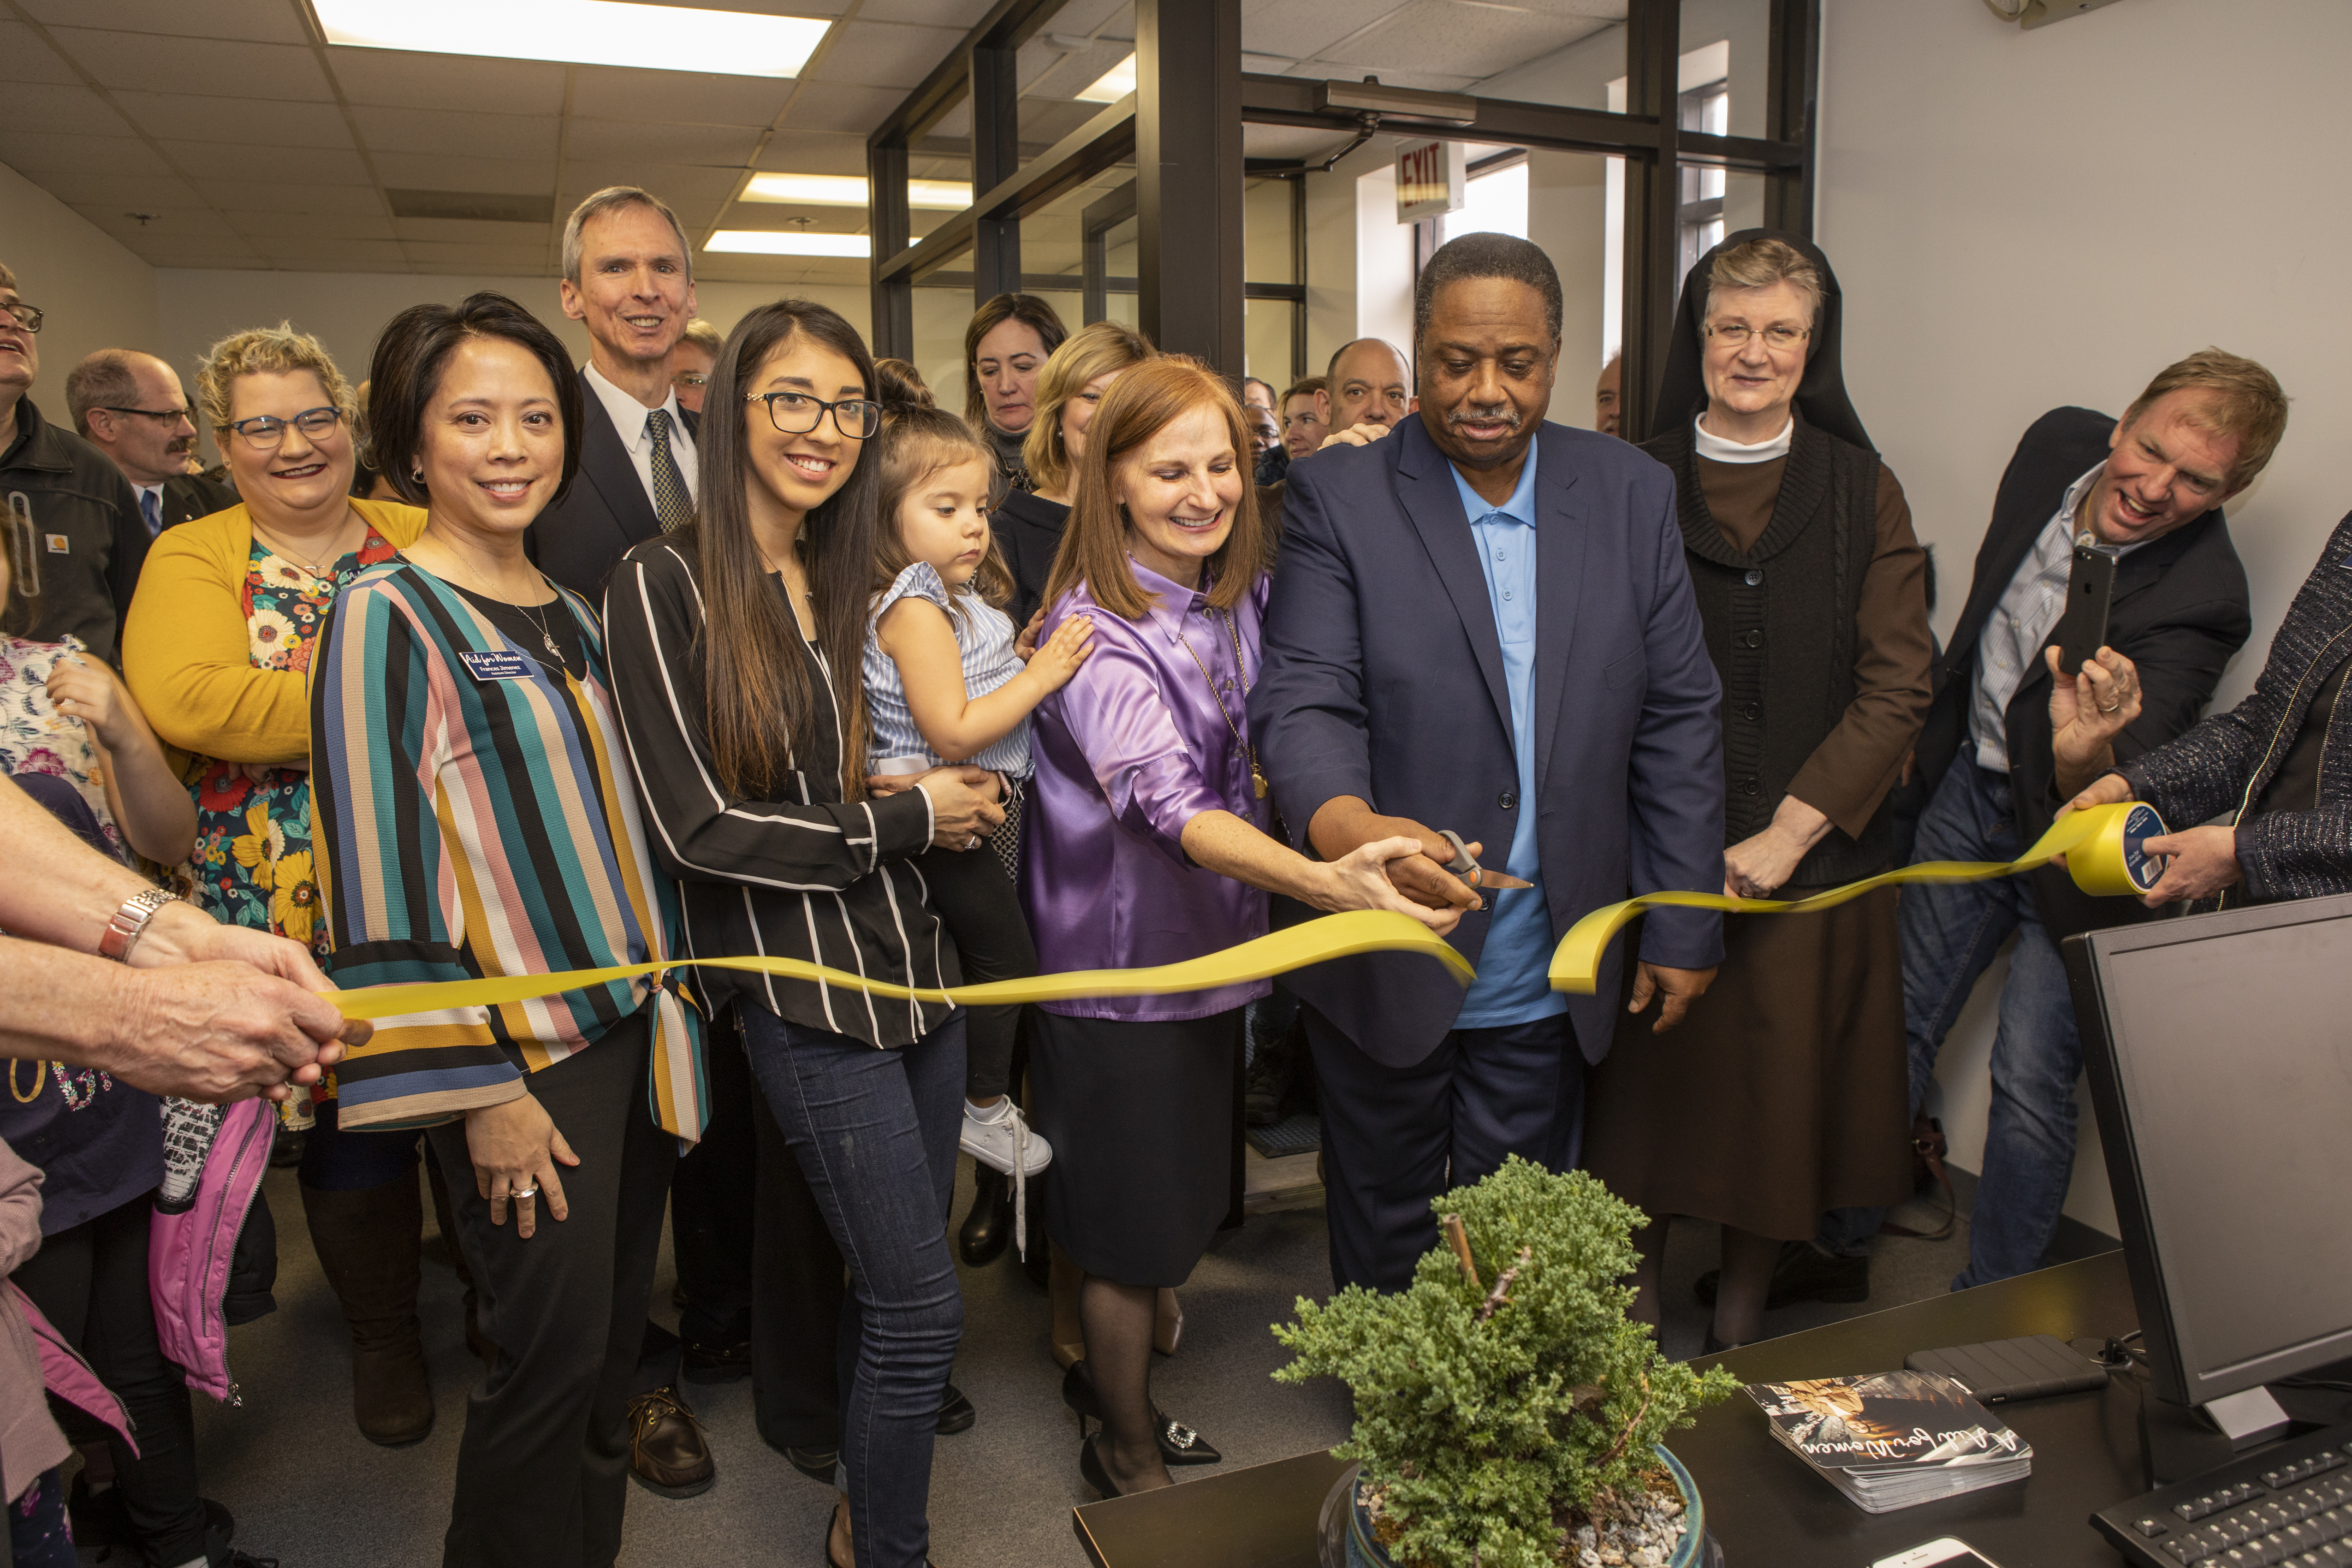 Oct. 25, we honor the new Aid for Women Center in Flossmoor.  Here is an image of the center opening, February, 2019.